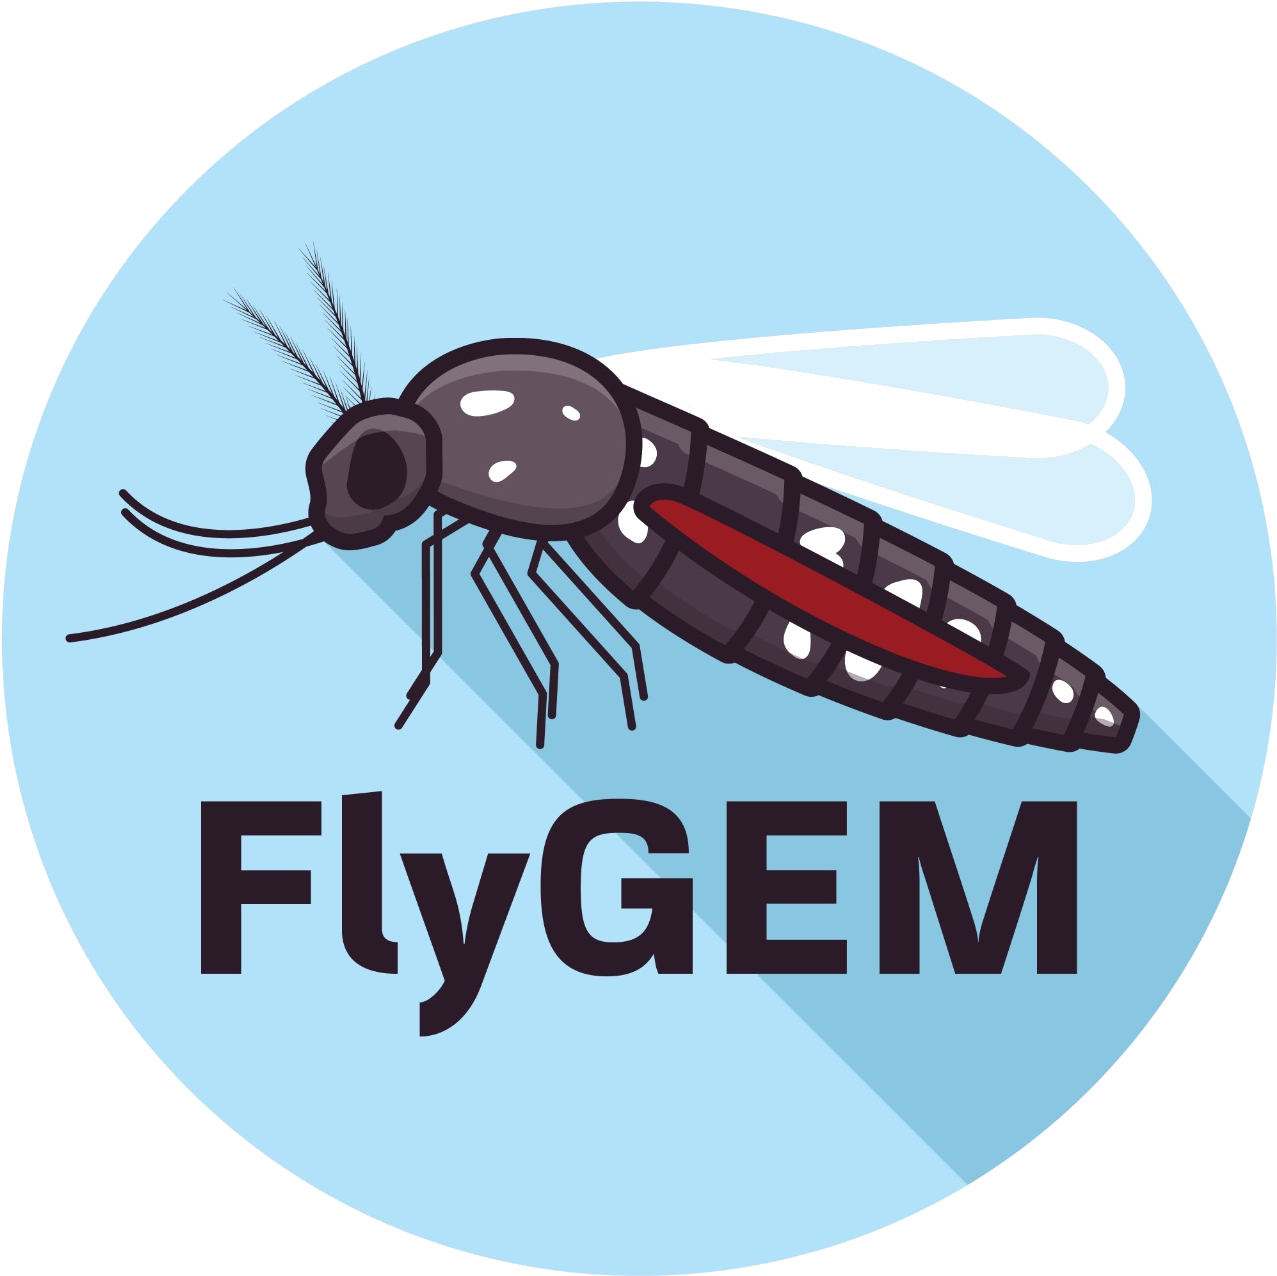 Mosquito Vector Graphic Fly G E M